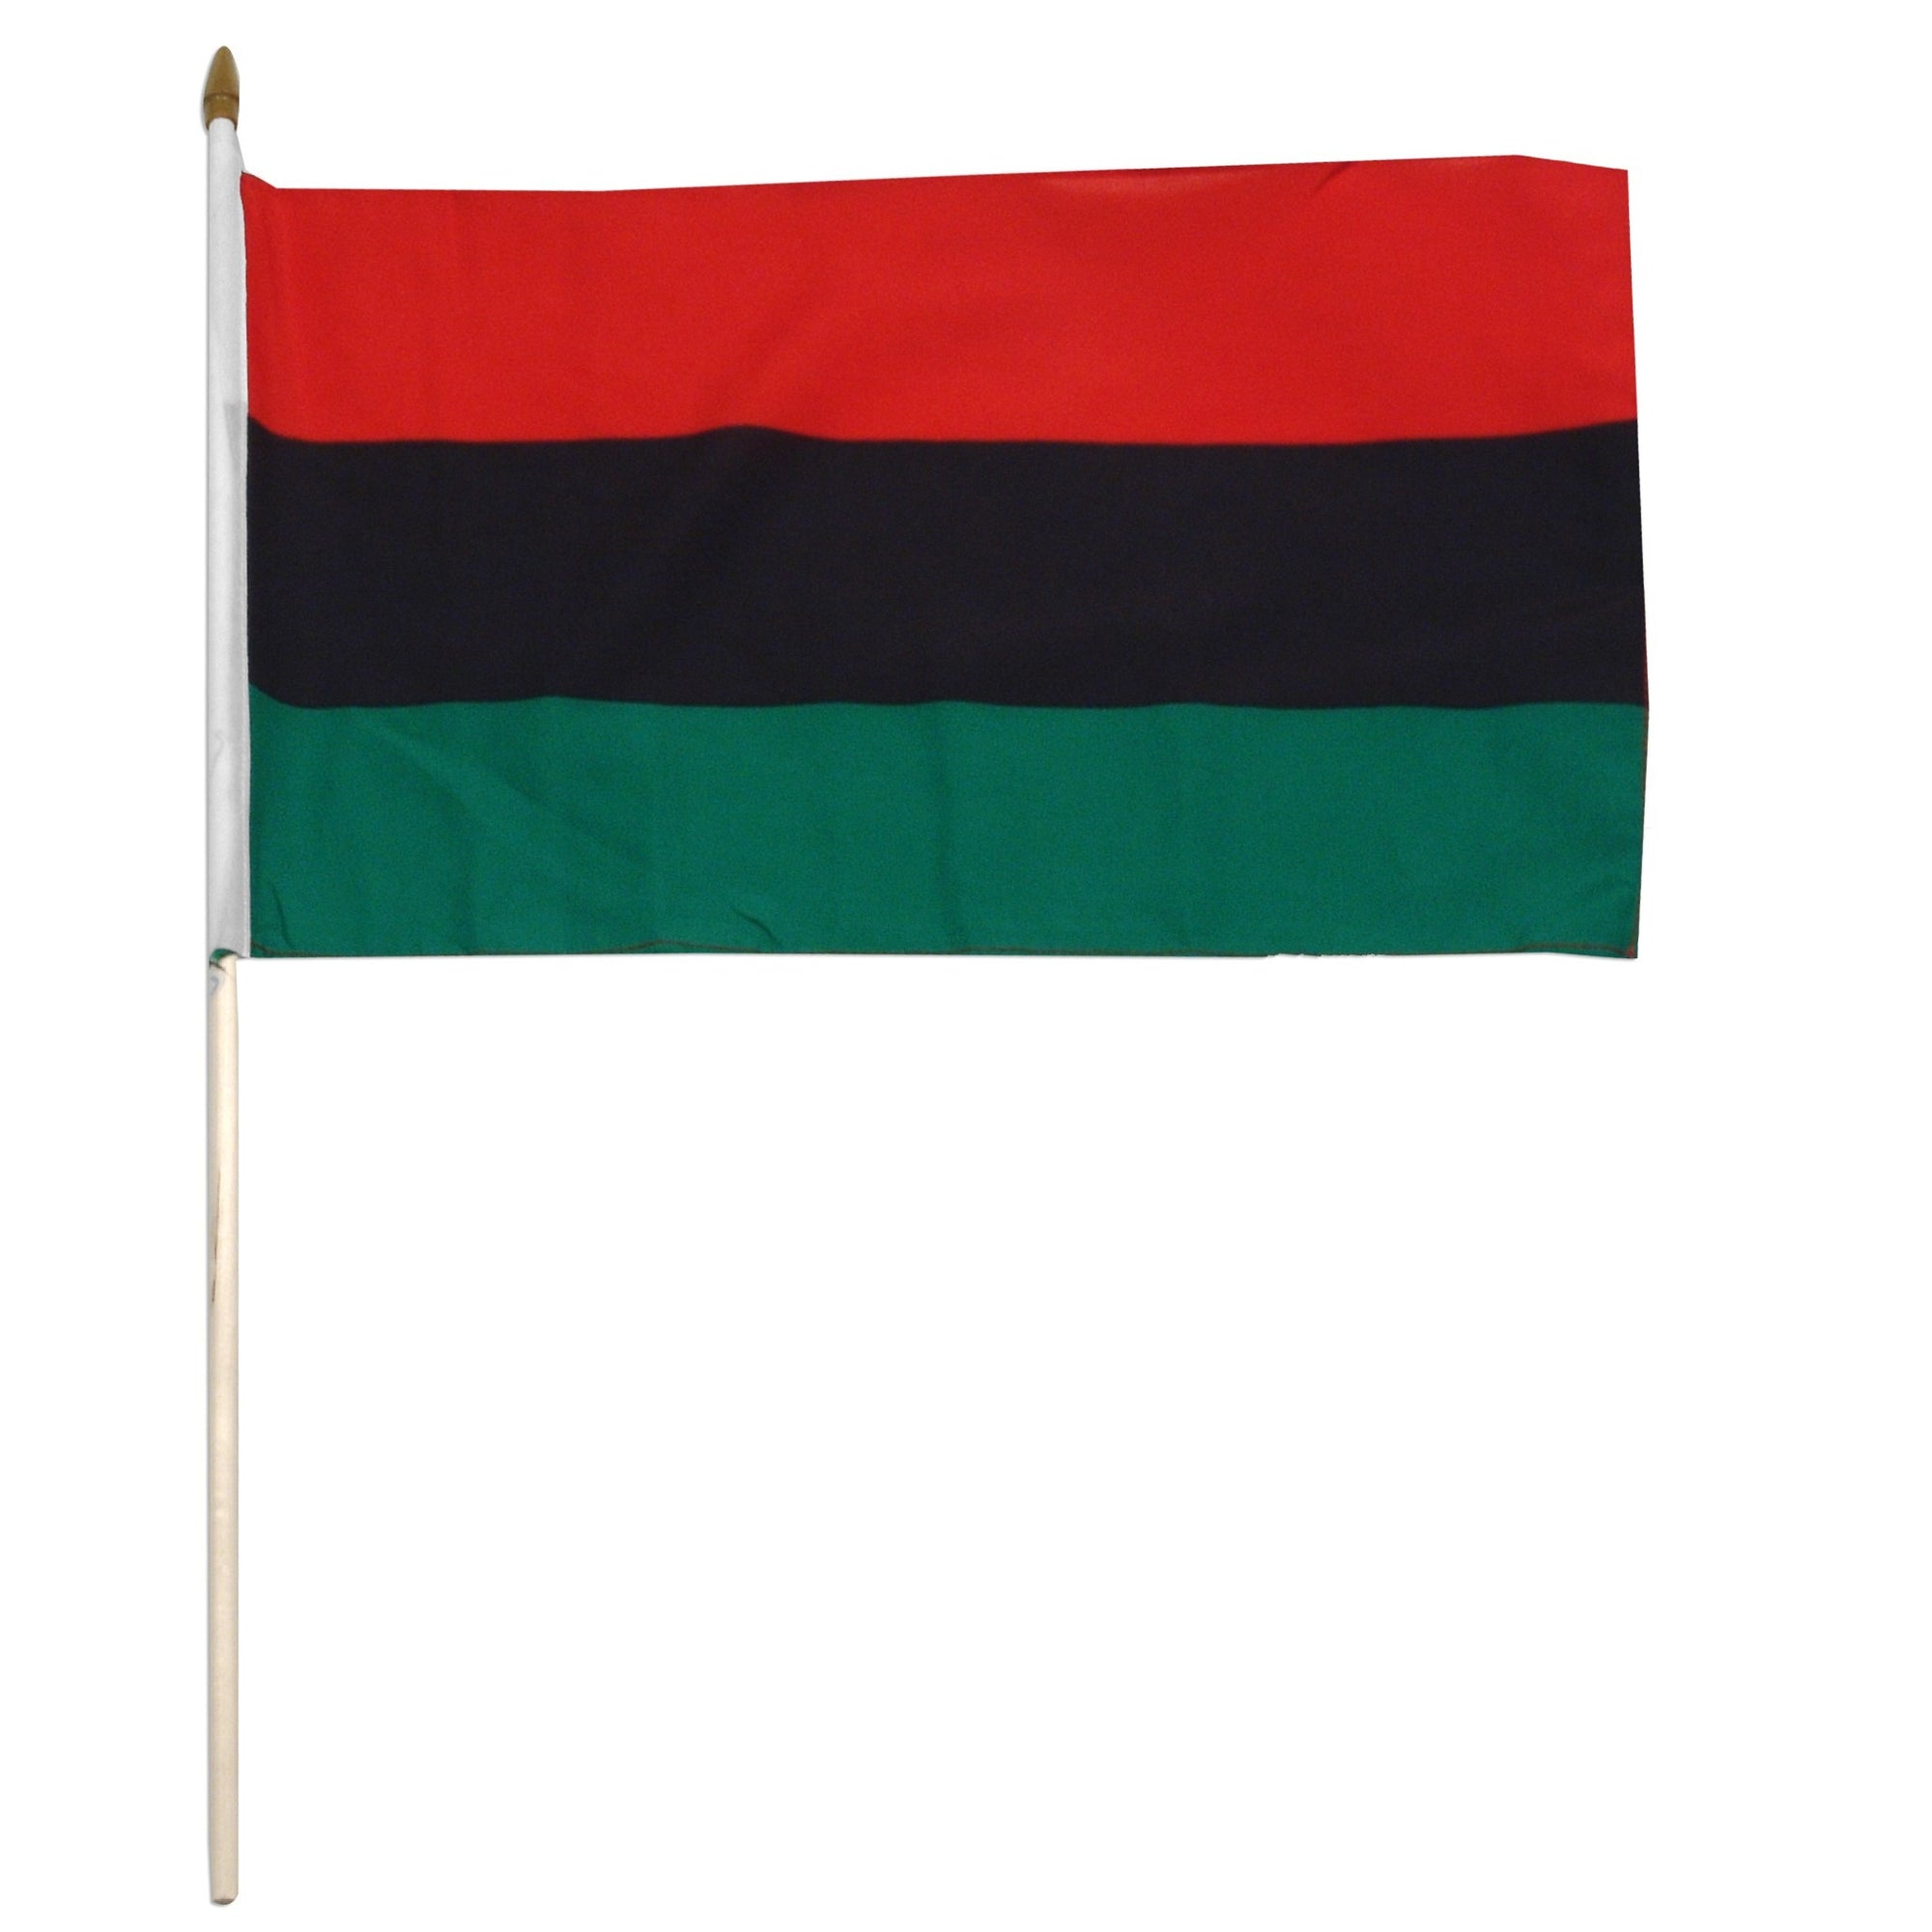 Buy Afro American Flag African American school church business flag for sale online cheap